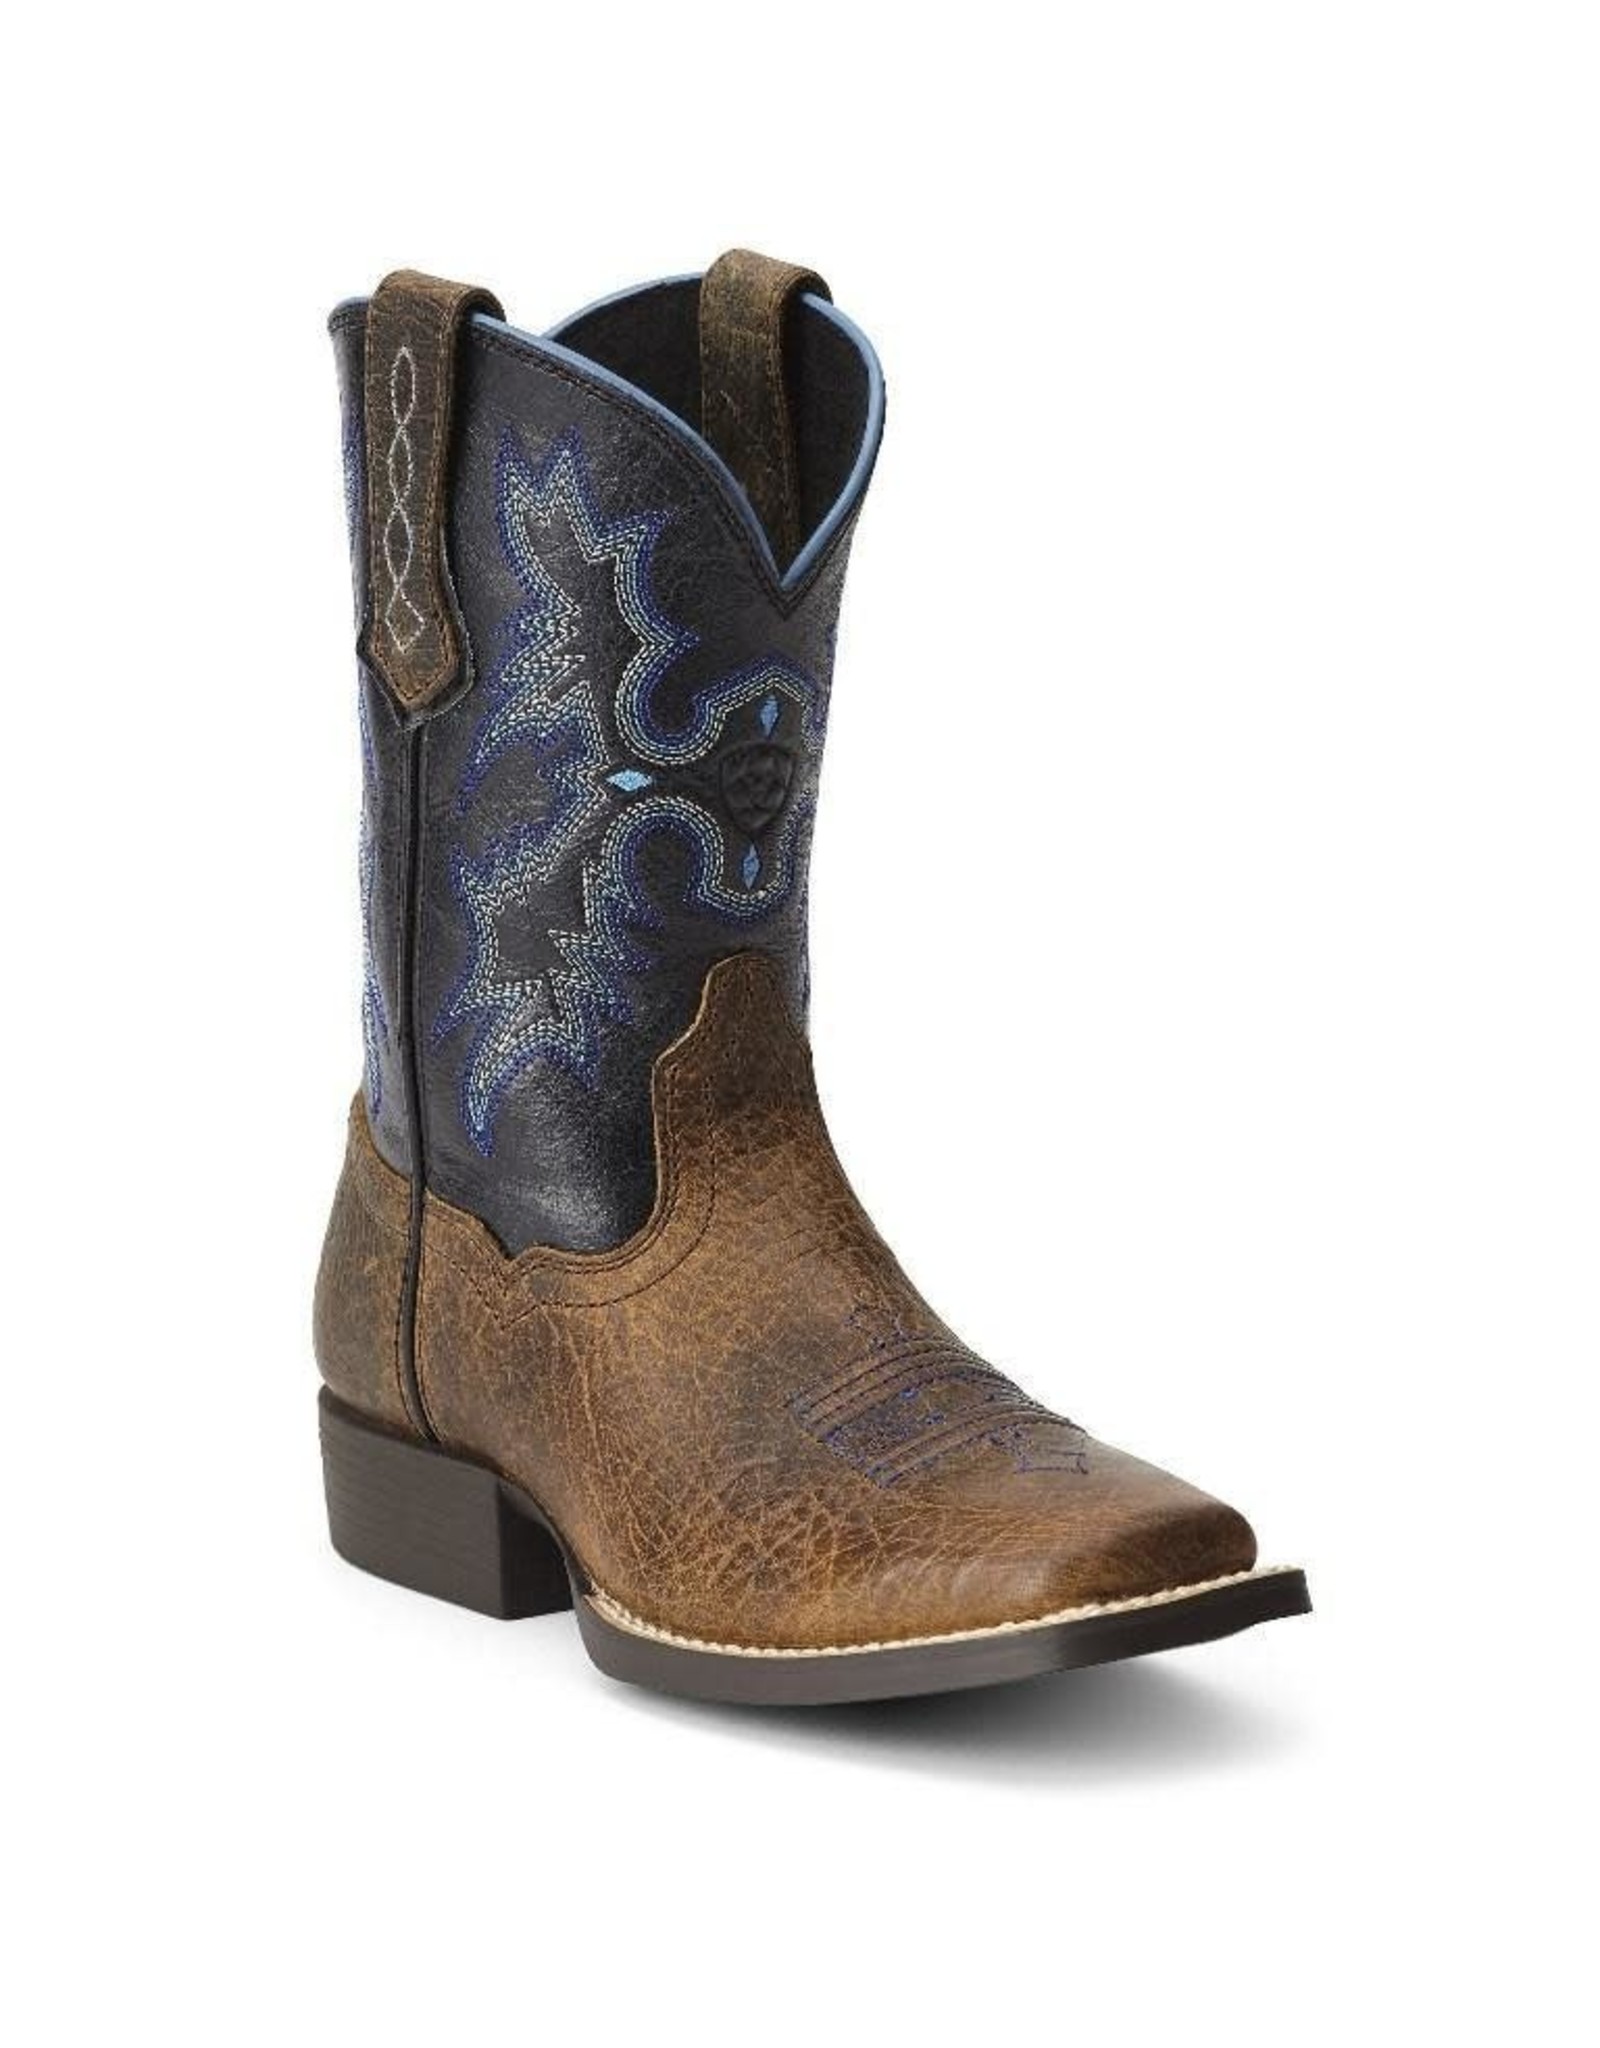 Ariat Kid's Tombstone Blue 10012794 Cowboy Boots